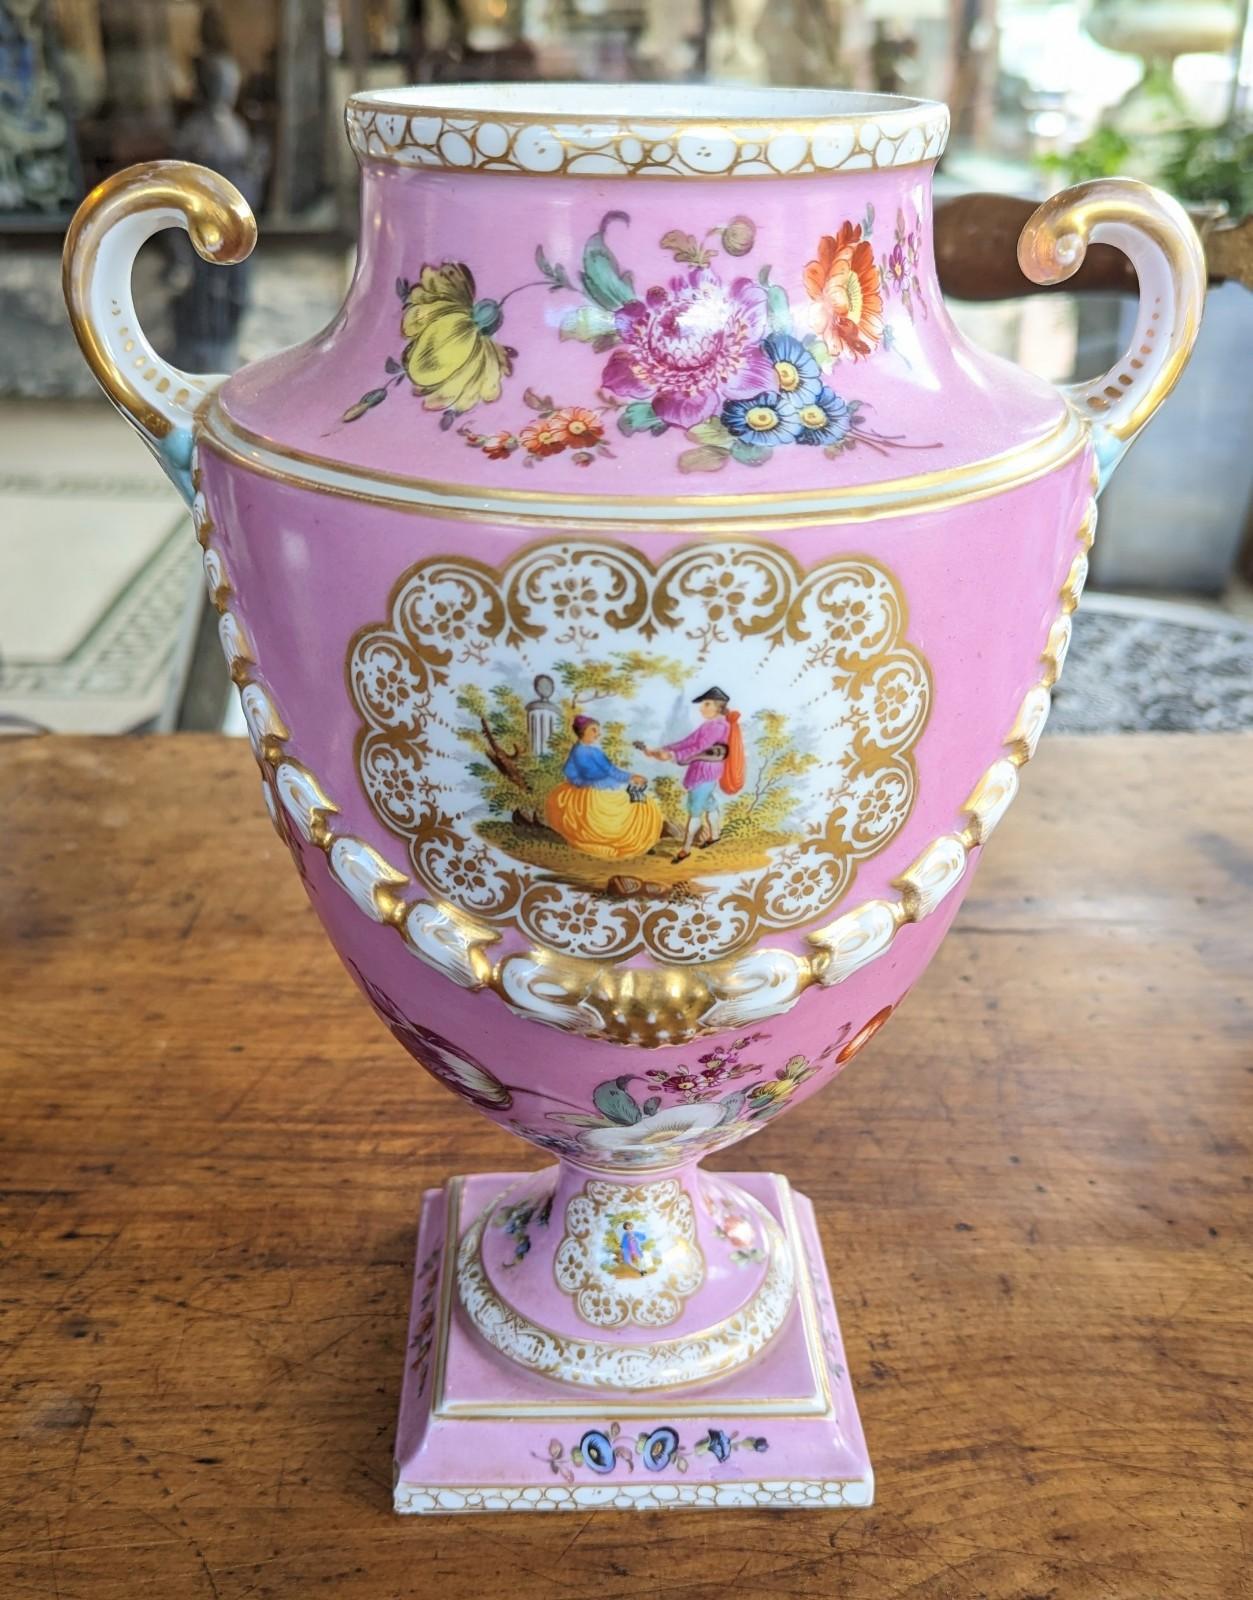 Stunning large antique Dresden porcelain vase in the shape of an urn, featuring a luscious pink color with gilded accents and a courting scene. Signed / hallmarked 